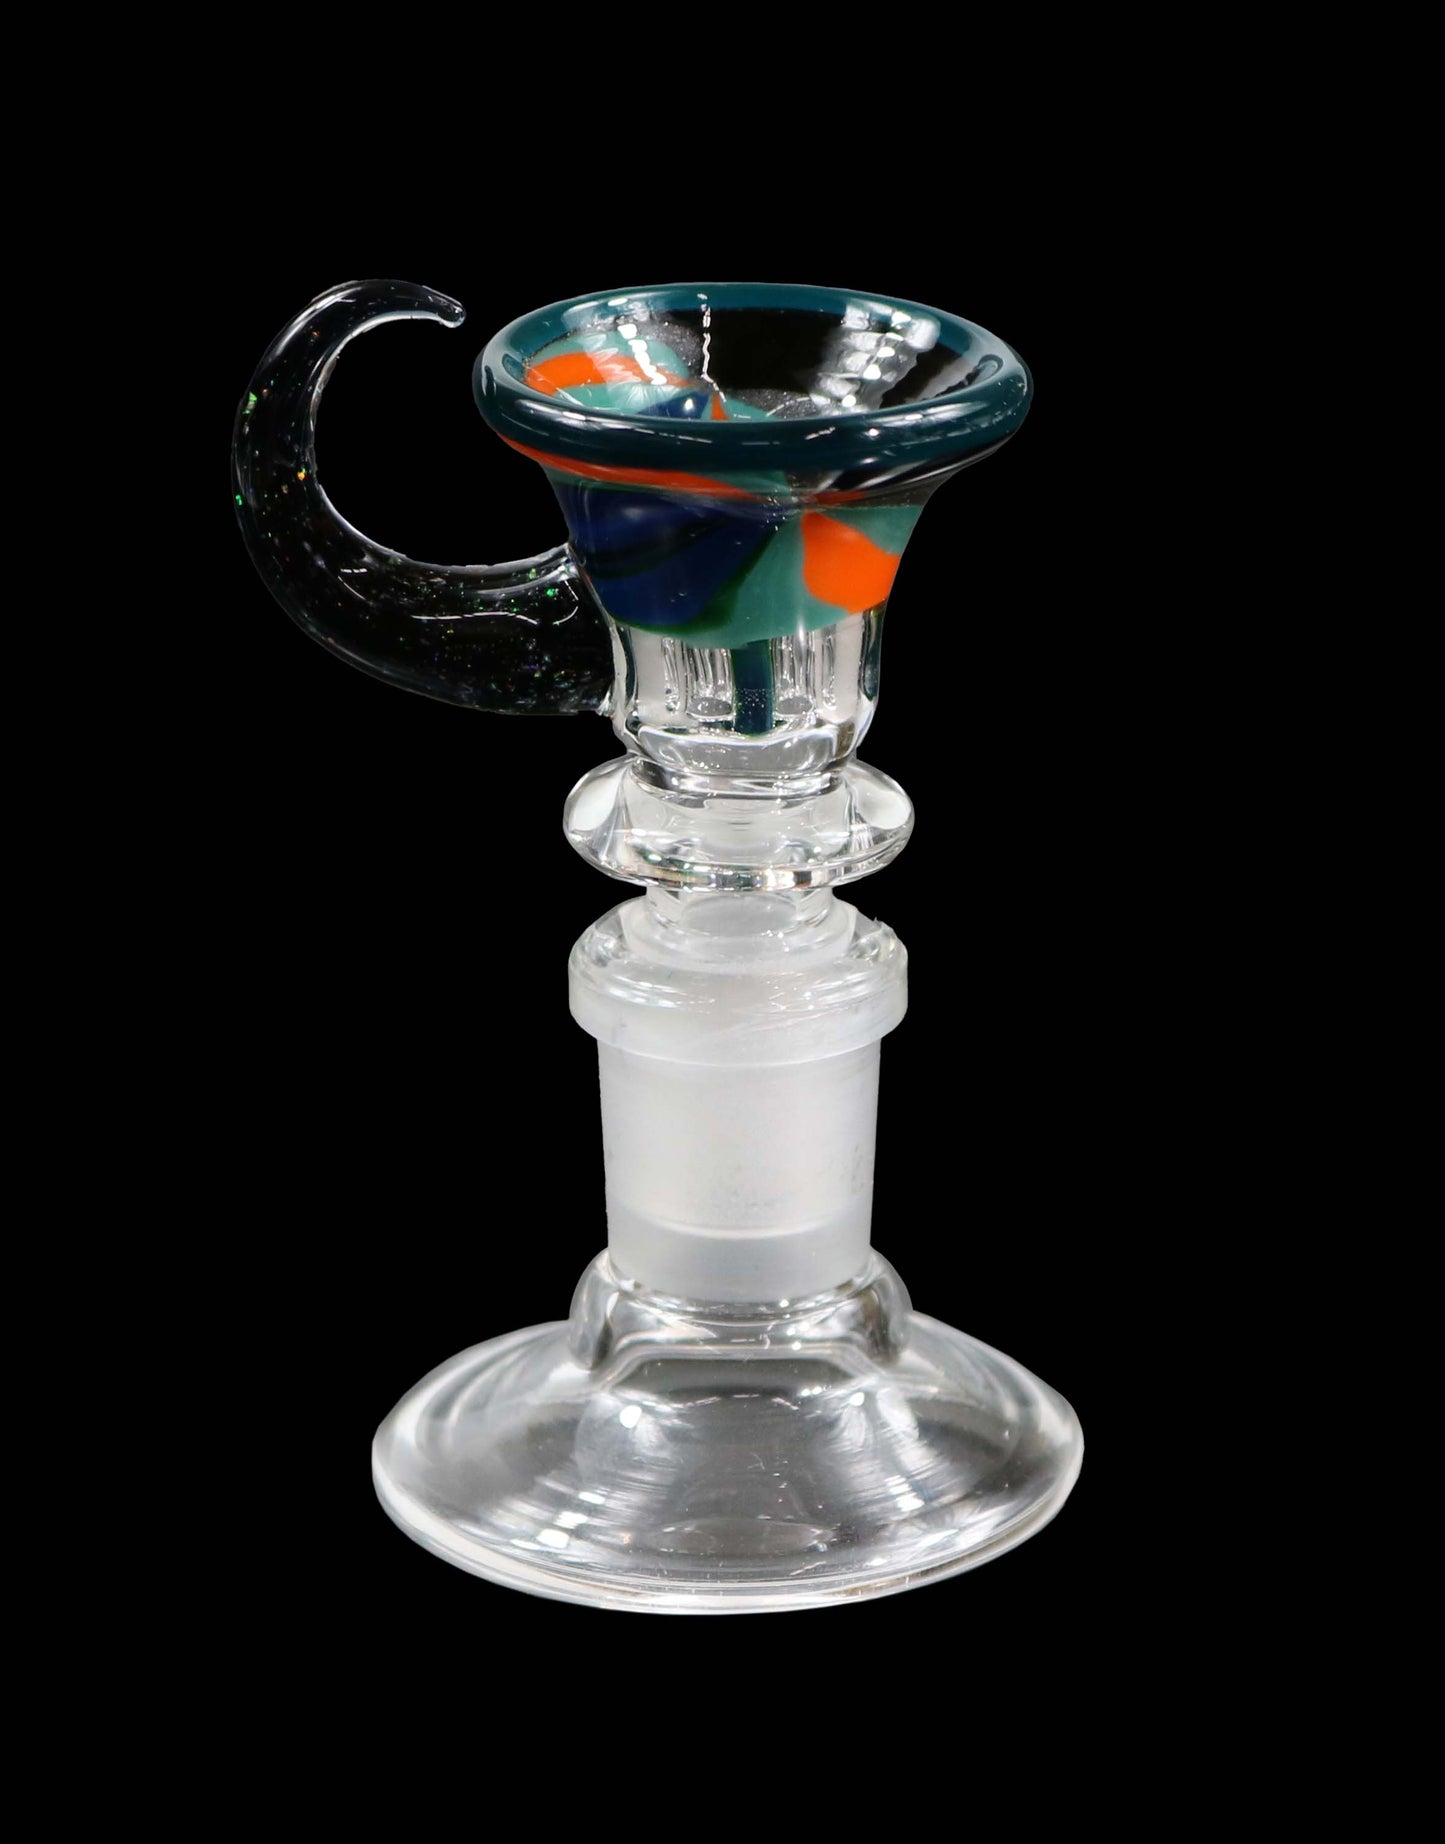 14mm Martini Bong Slide with built in screen from Glass by Slick - Teal/Orange/Blue